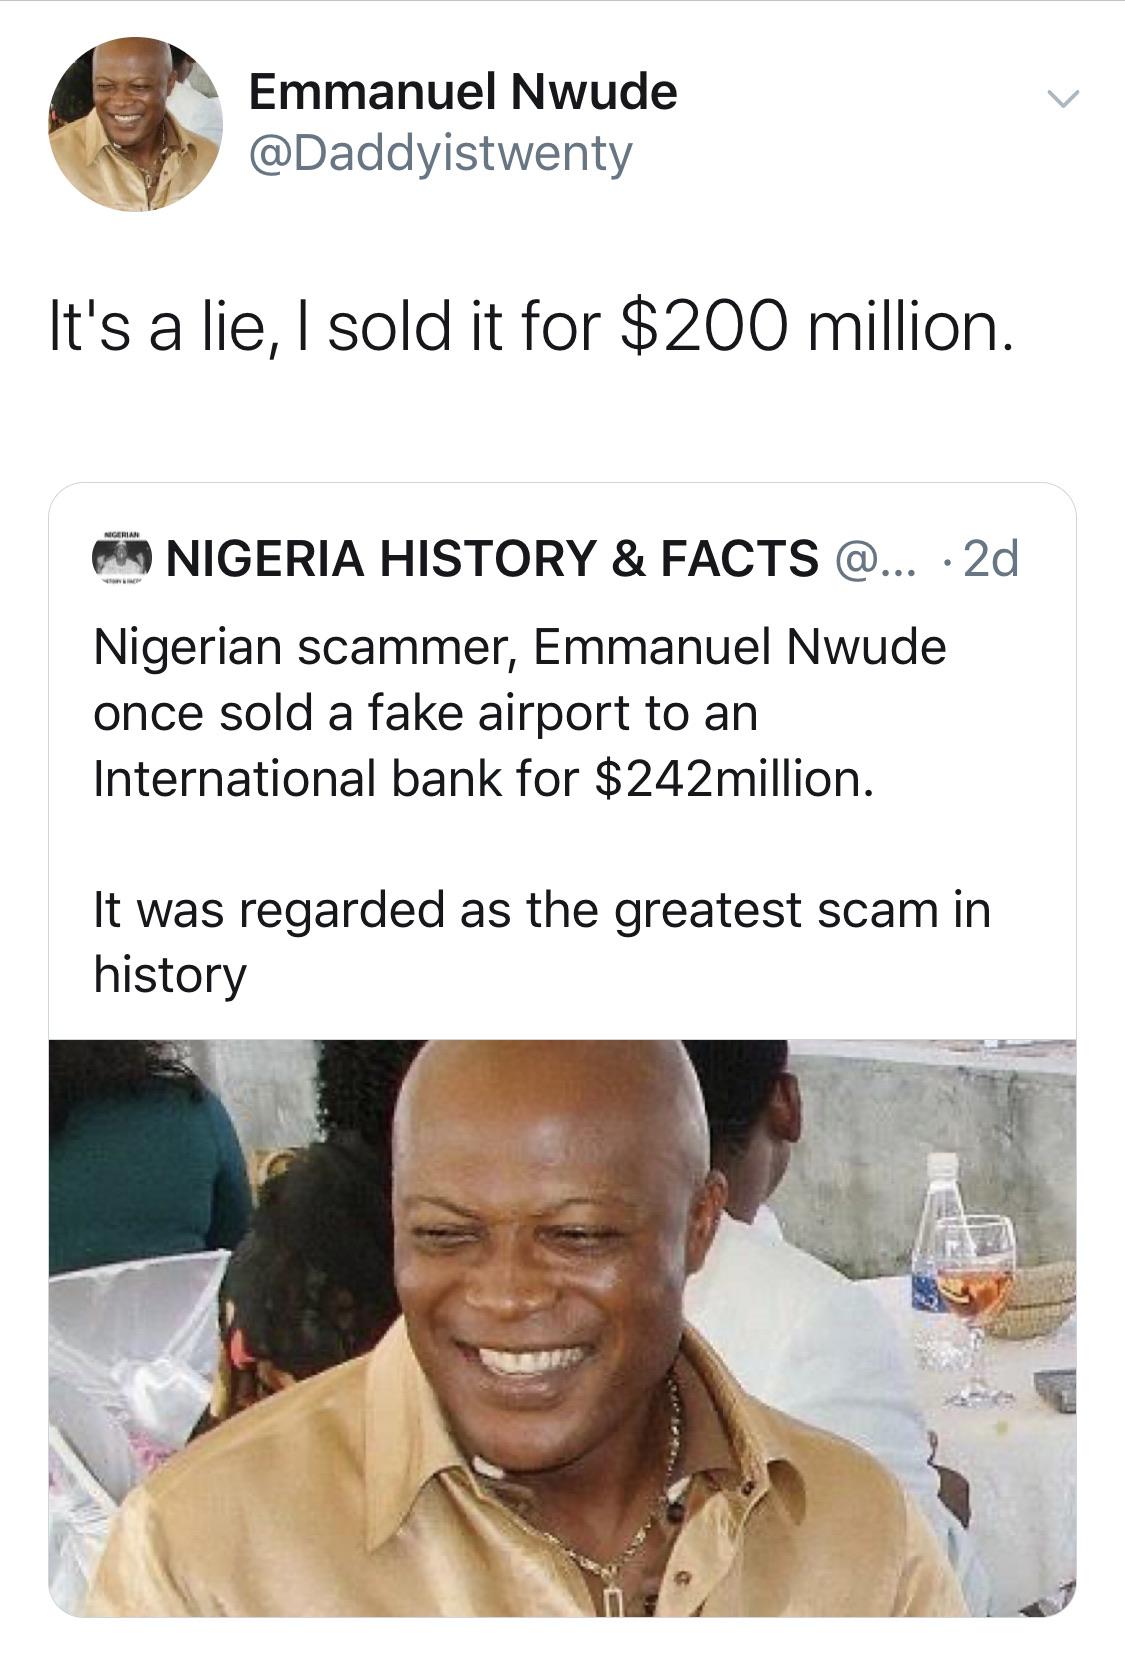 black twitter - Emmanuel Nwude It's a lie, I sold it for $200 million. Nigeria History & Facts @... 2d Nigerian scammer, Emmanuel Nwude once sold a fake airport to an International bank for $242million. It was regarded as the greatest scam in history